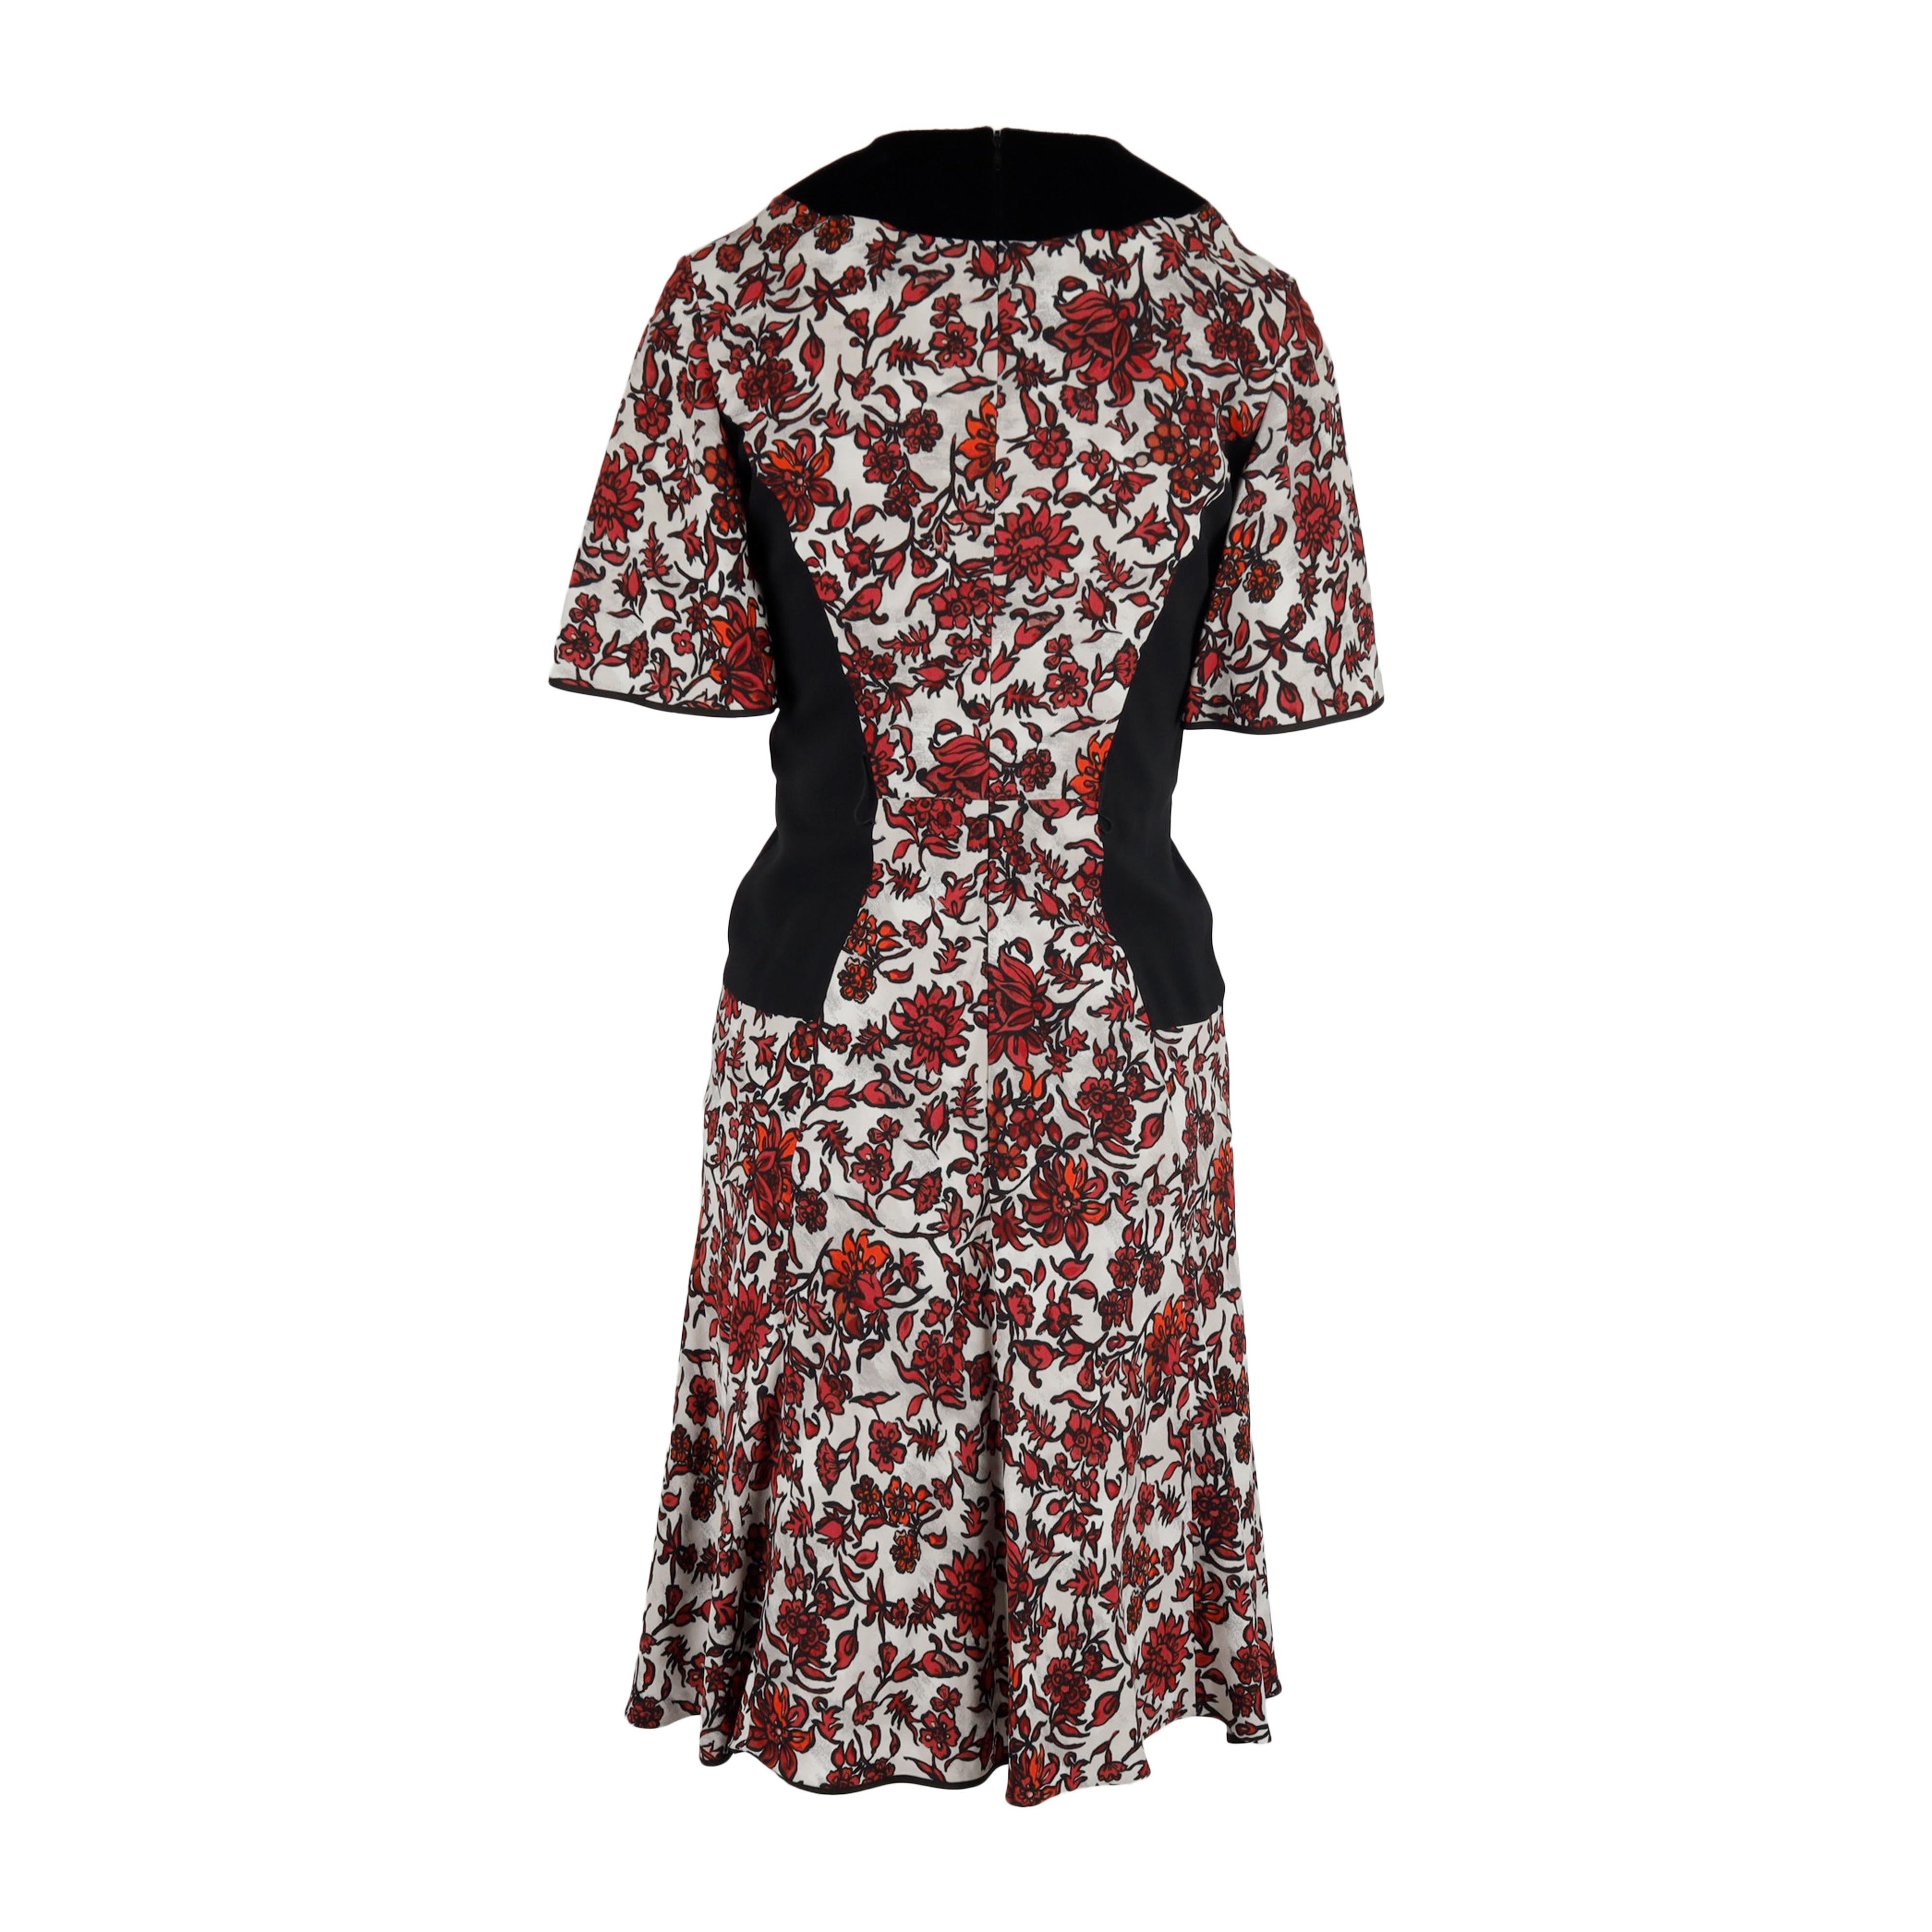 Louis Vuitton Red Black Floral Printed Dress For Sale 2